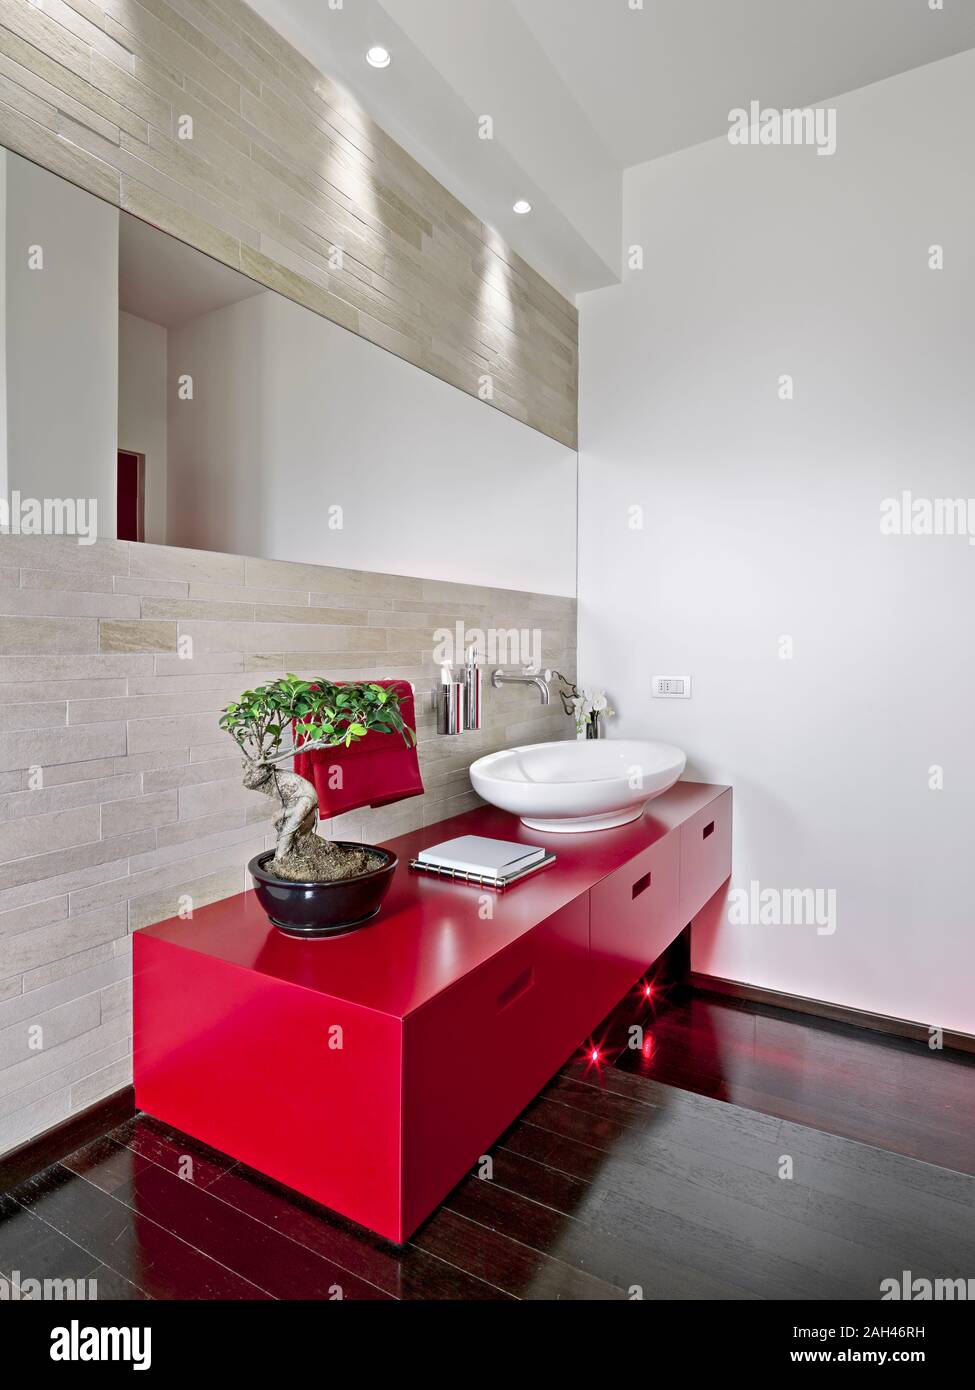 interior shot of a modern bathroom in foreground the red washbasin cabinet the floor is made of wood Stock Photo